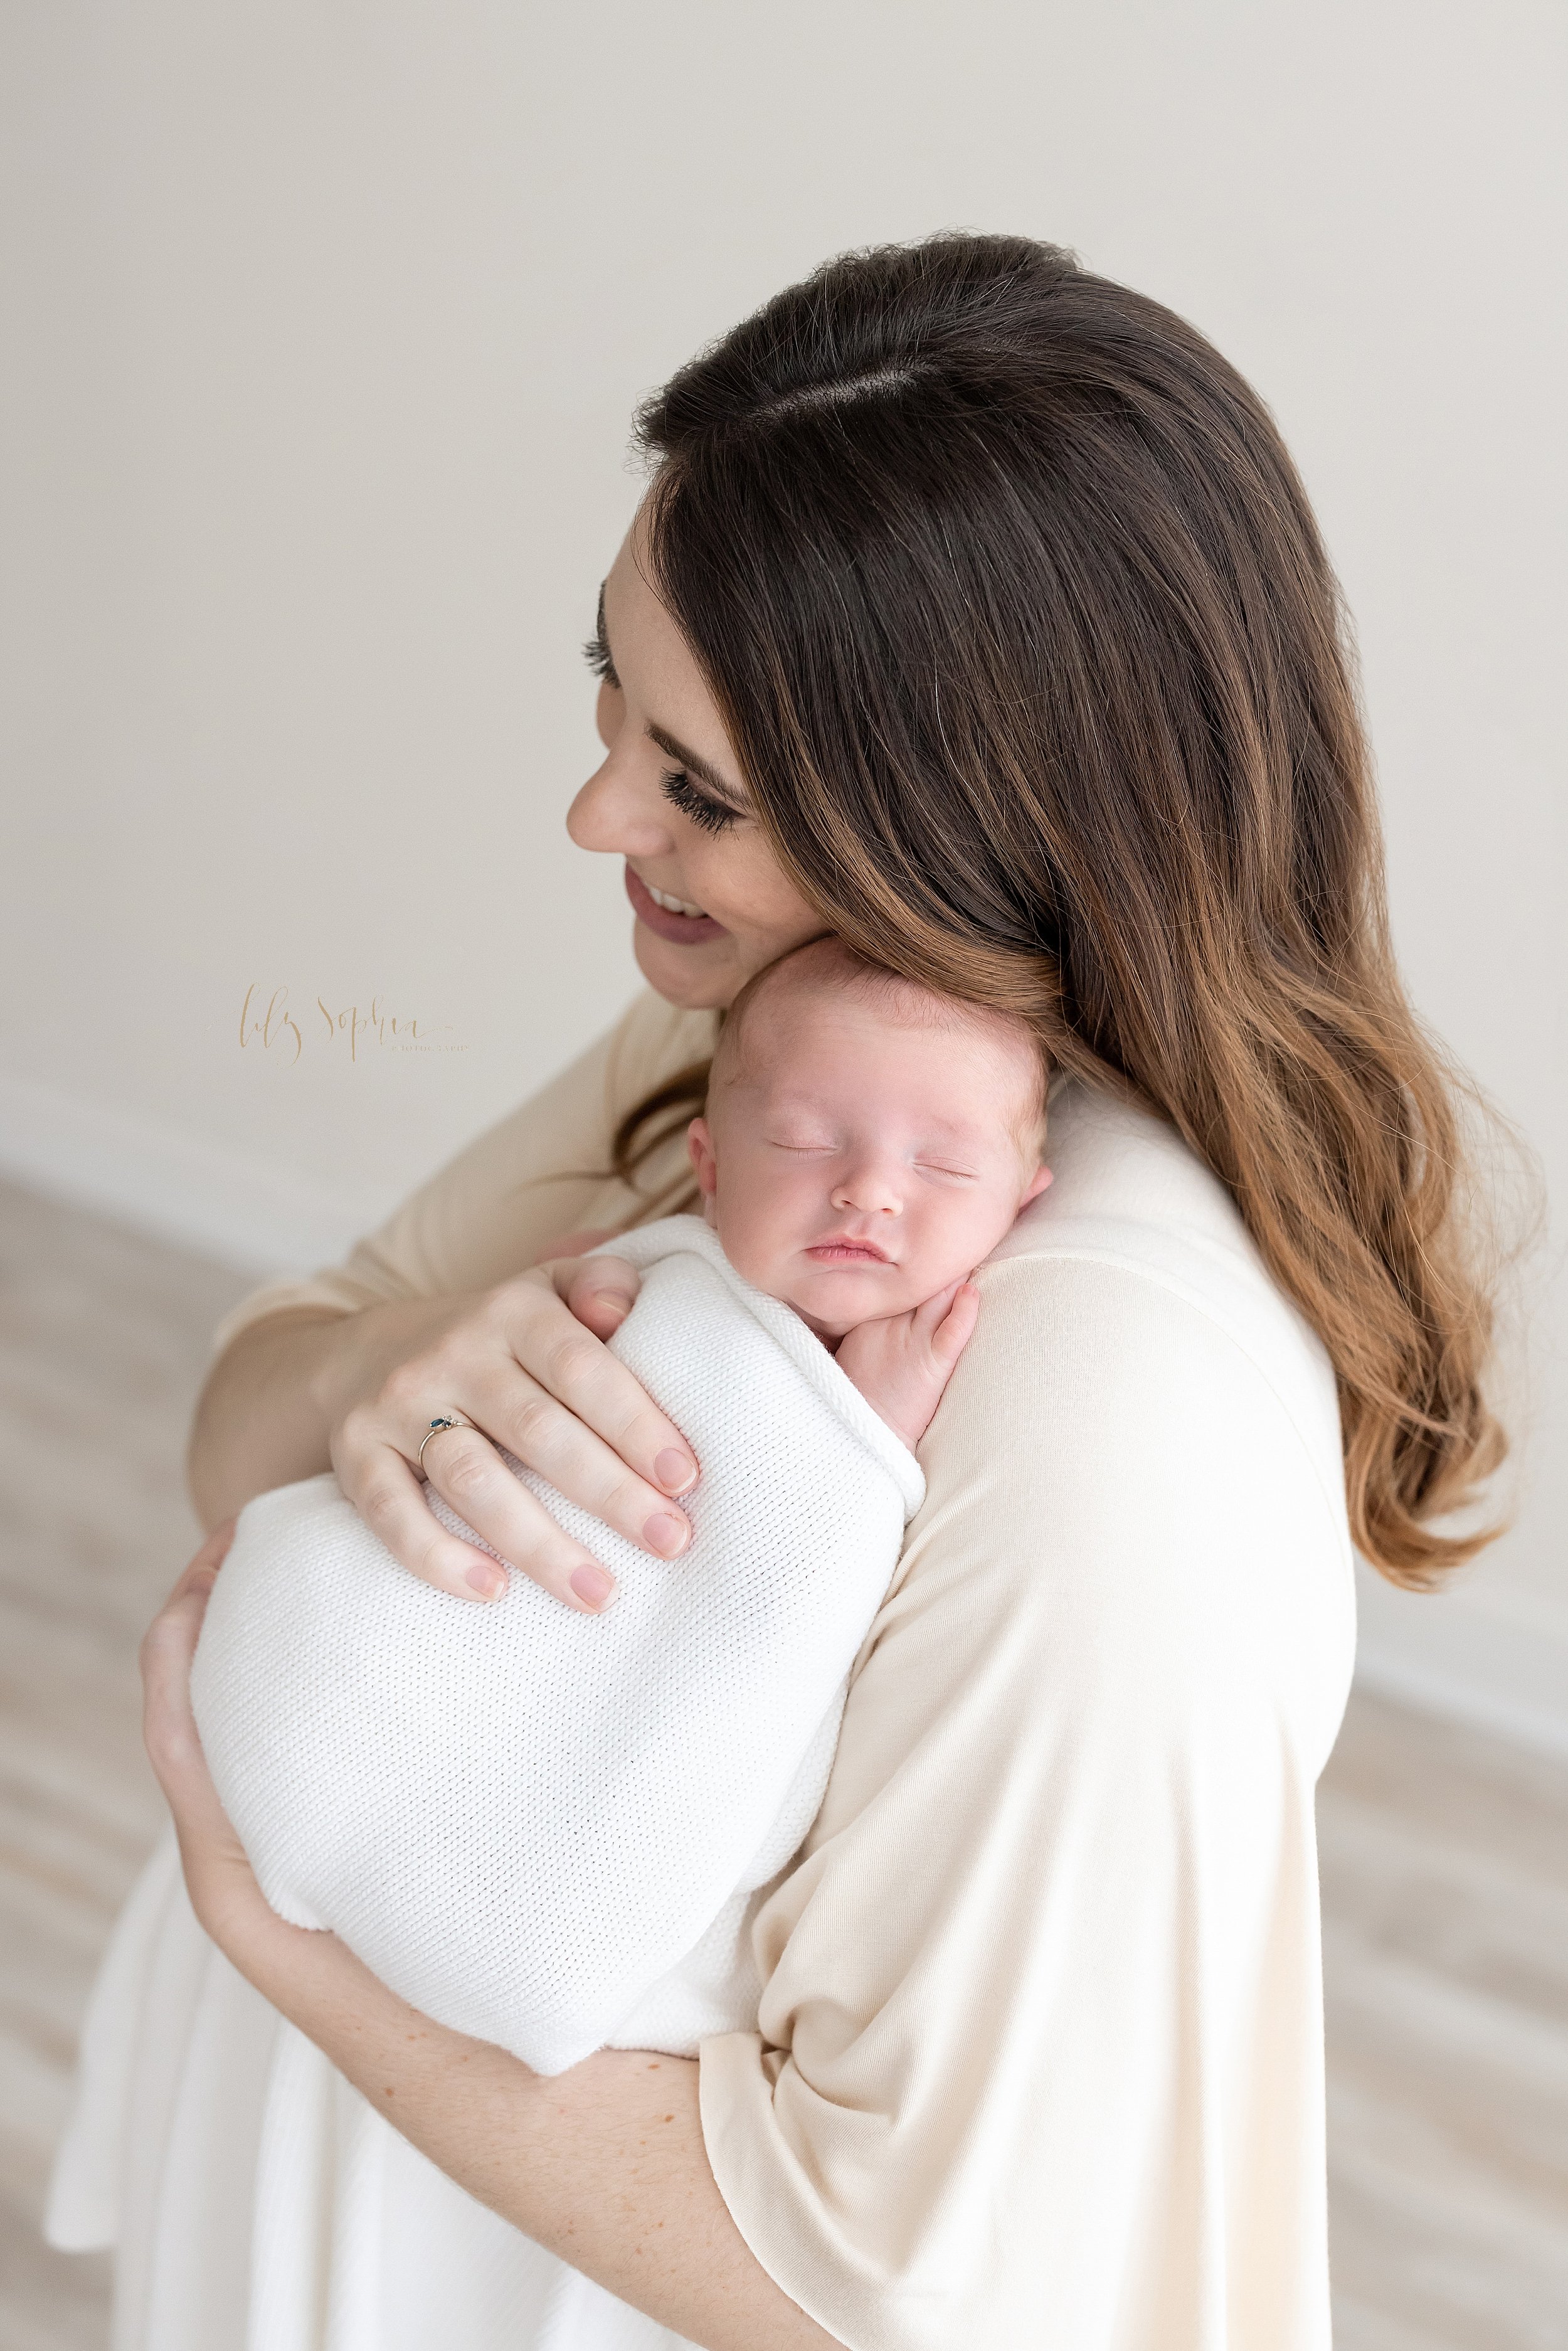  Newborn photo of a mother holding her contented infant boy in her right shoulder as she smiles with pride taken in a studio near Poncey Highlands in Atlanta, Georgia that uses natural light. 